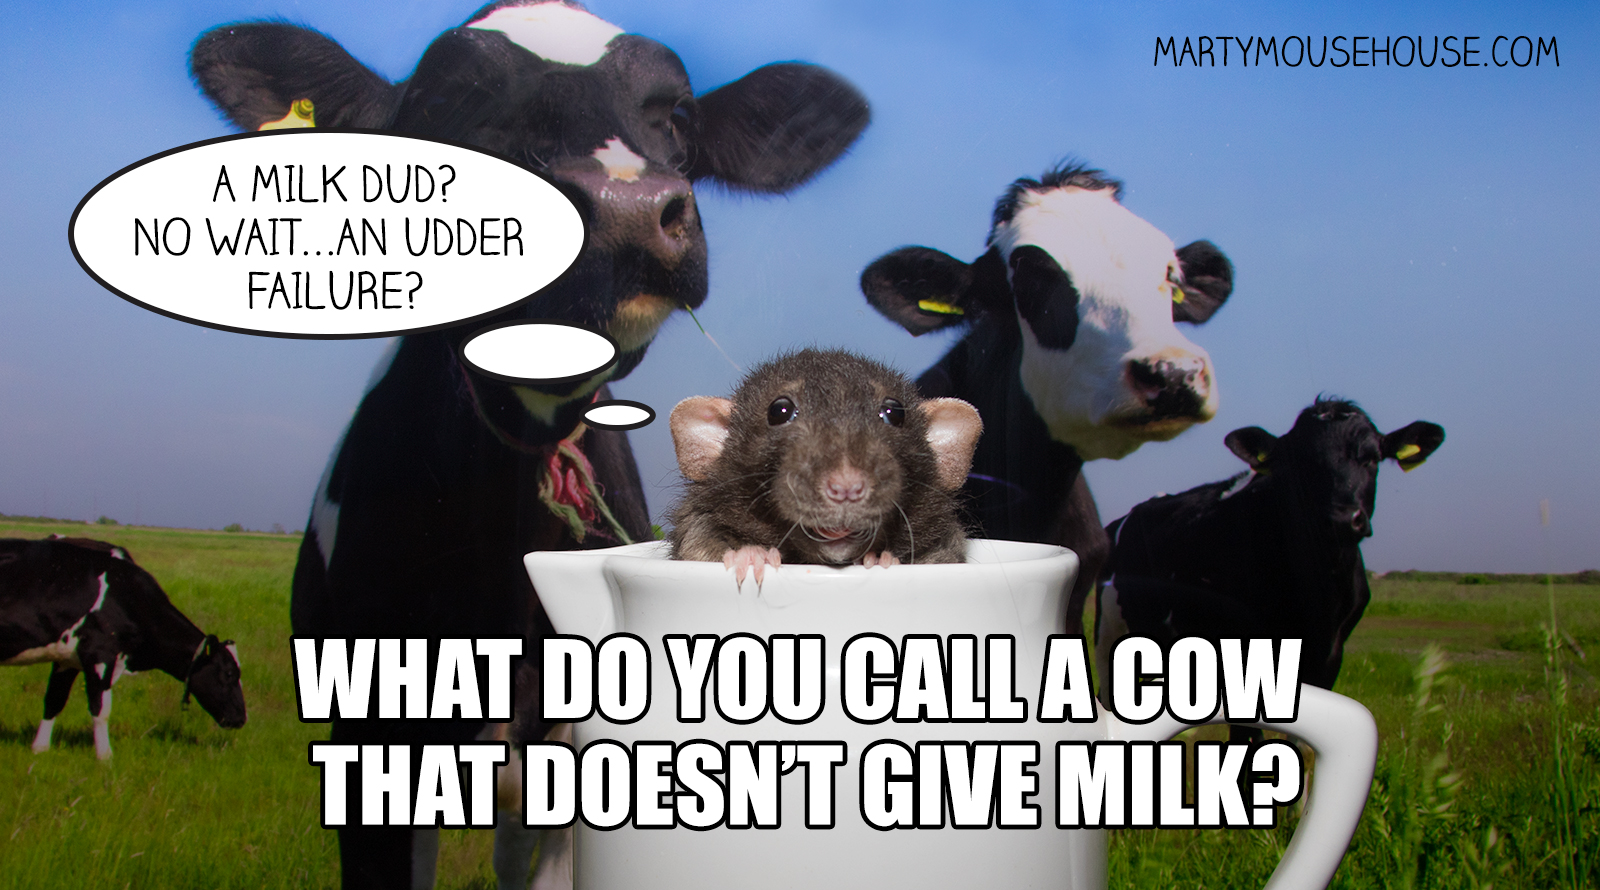 Cosmo's Cow Joke – Marty Mouse House